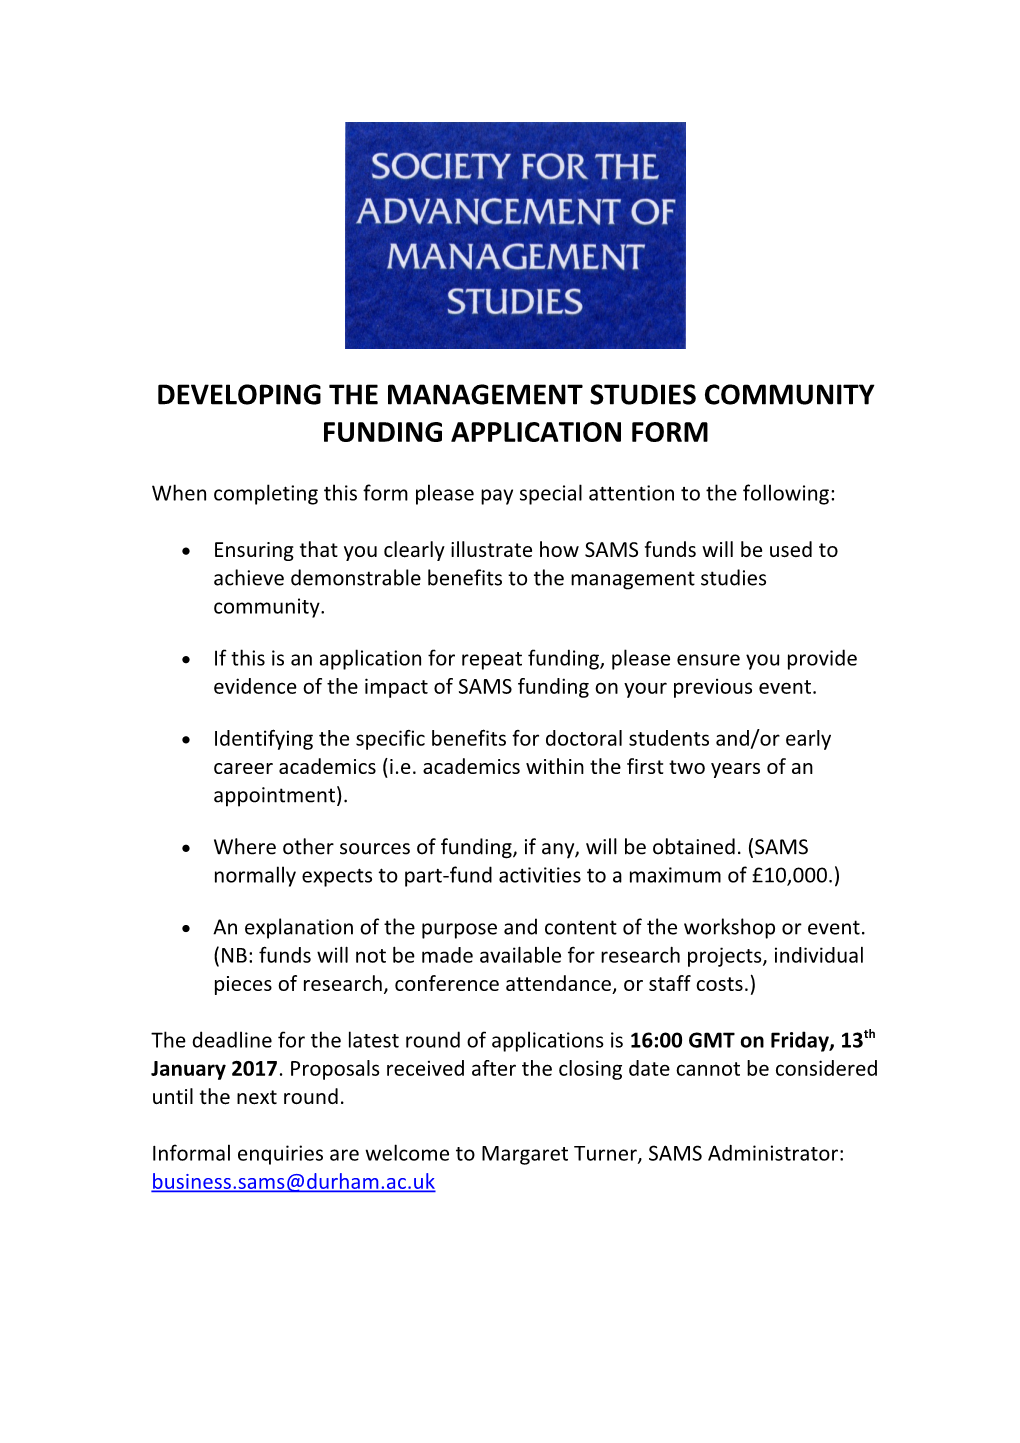 Developing the Management Studies Community